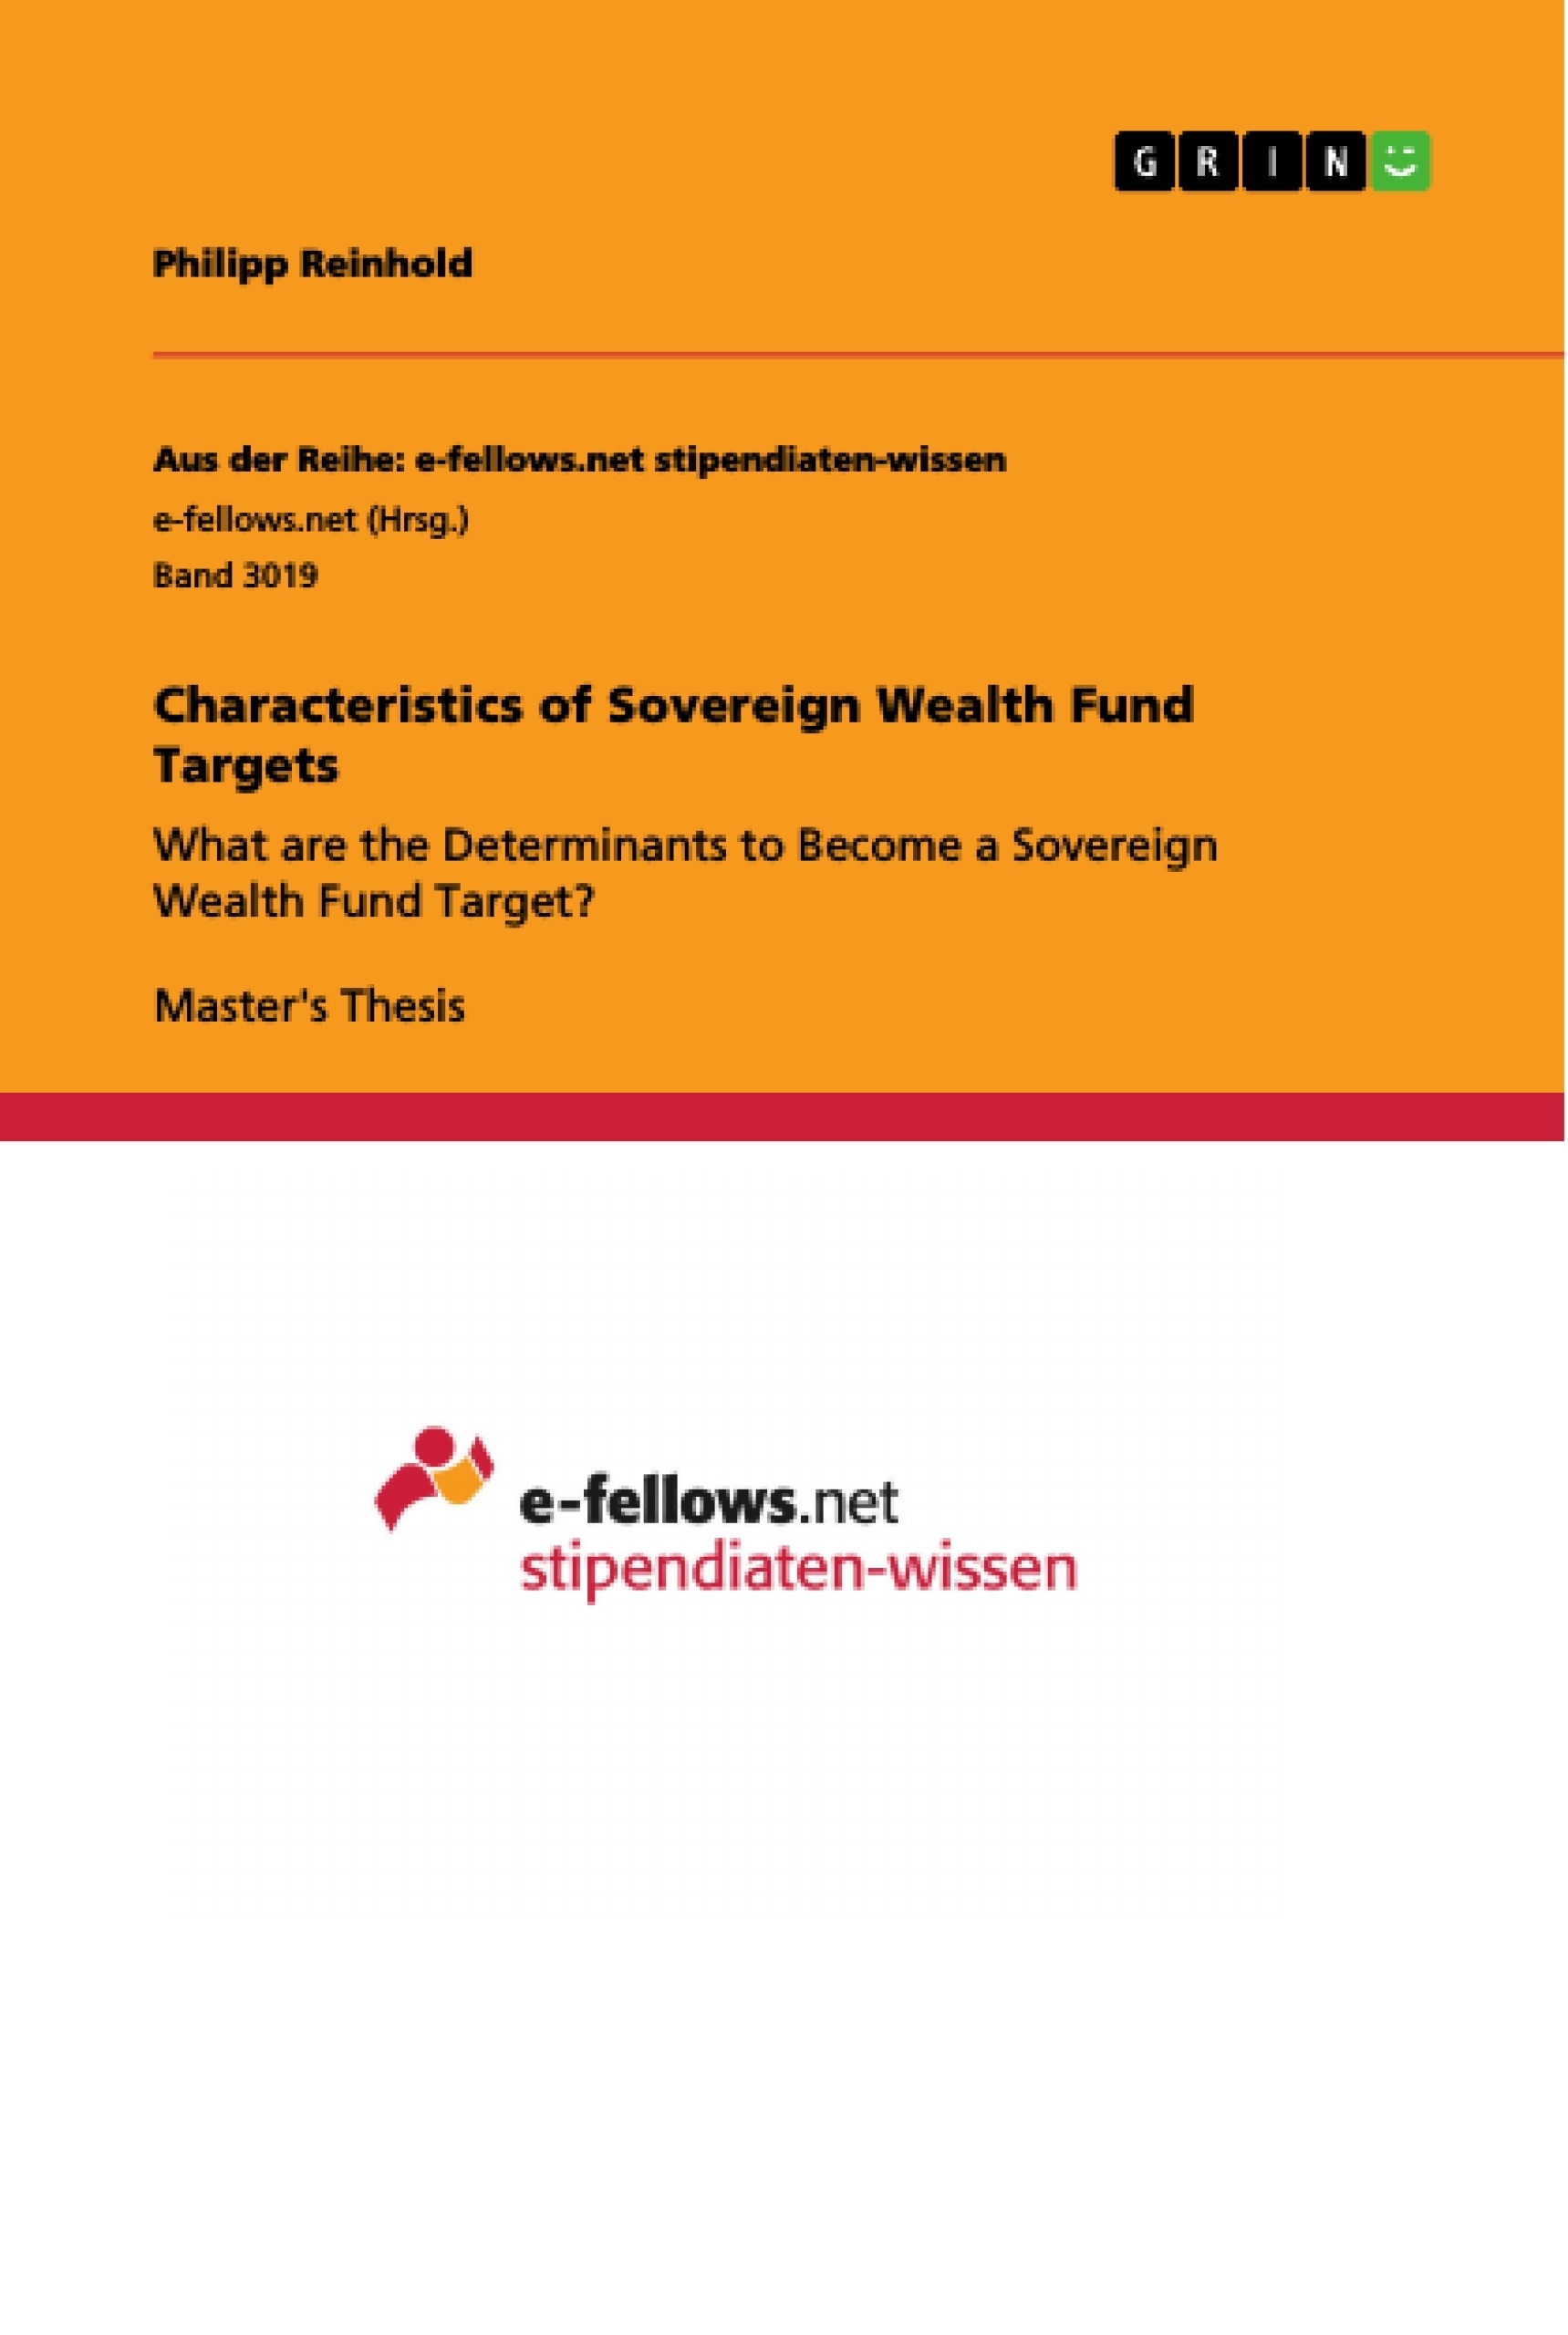 Title: Characteristics of Sovereign Wealth Fund Targets